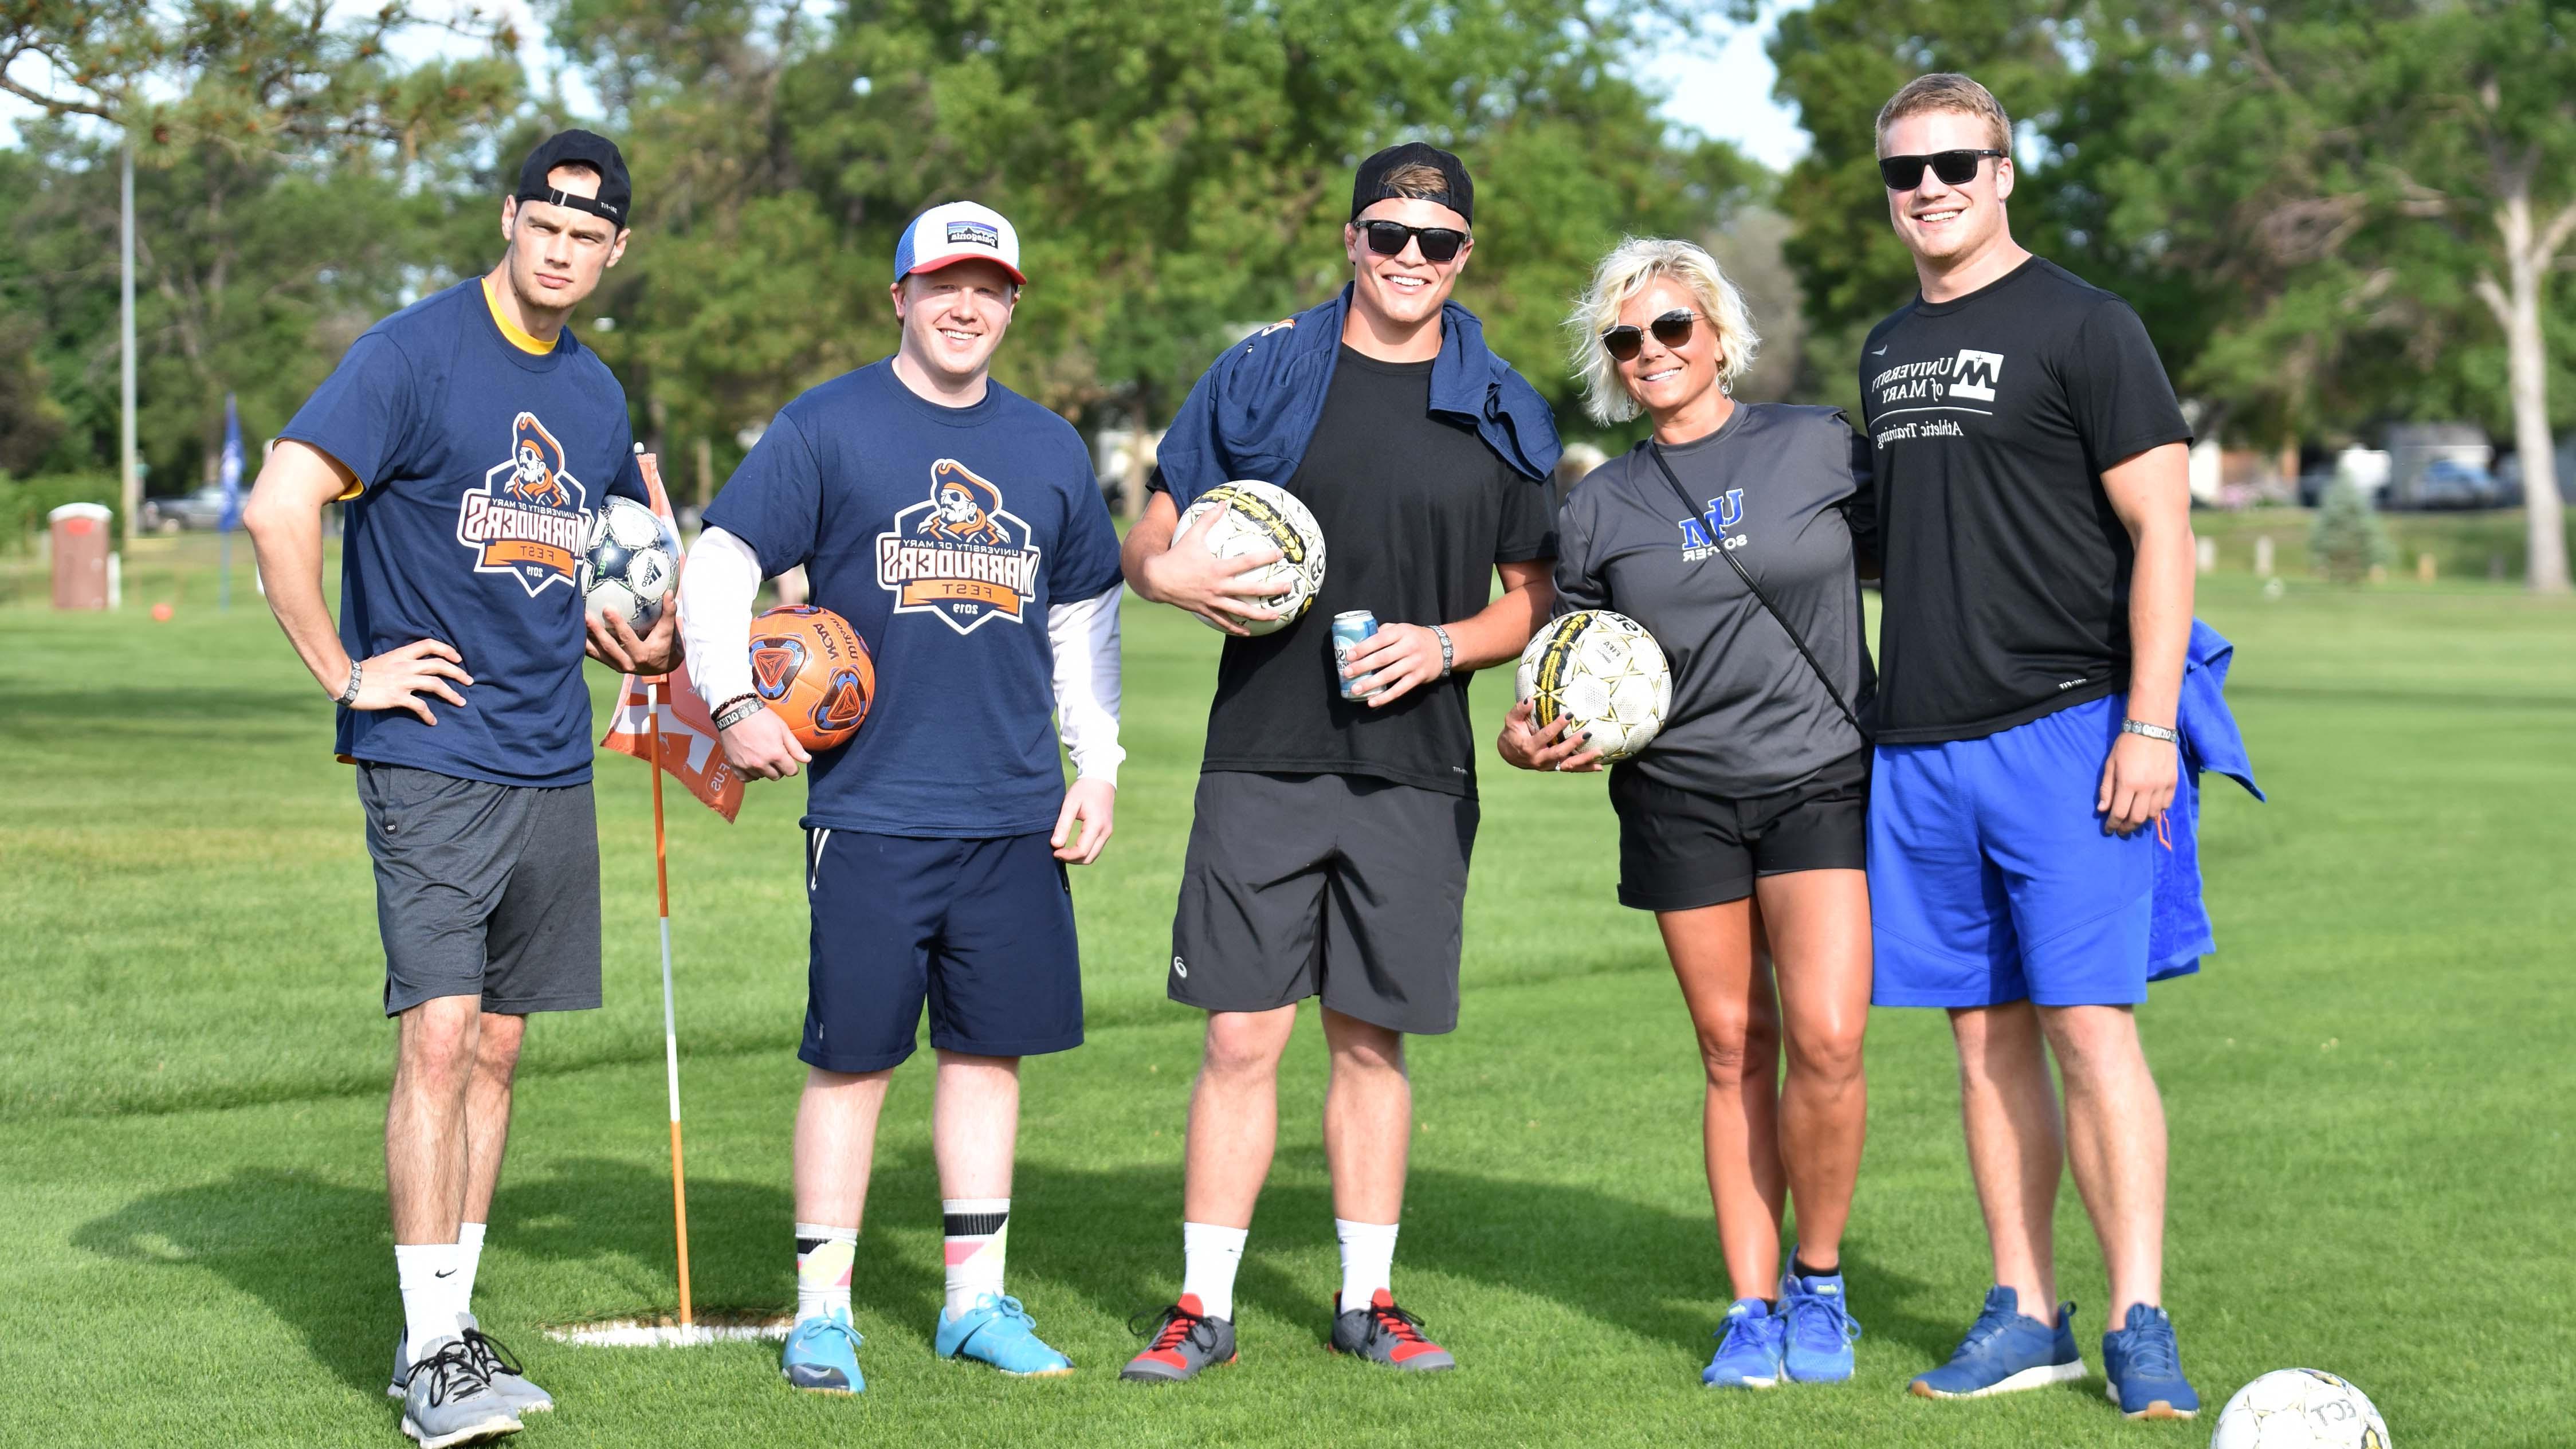 Five Marauders Fest participants holding soccer balls and smiling 